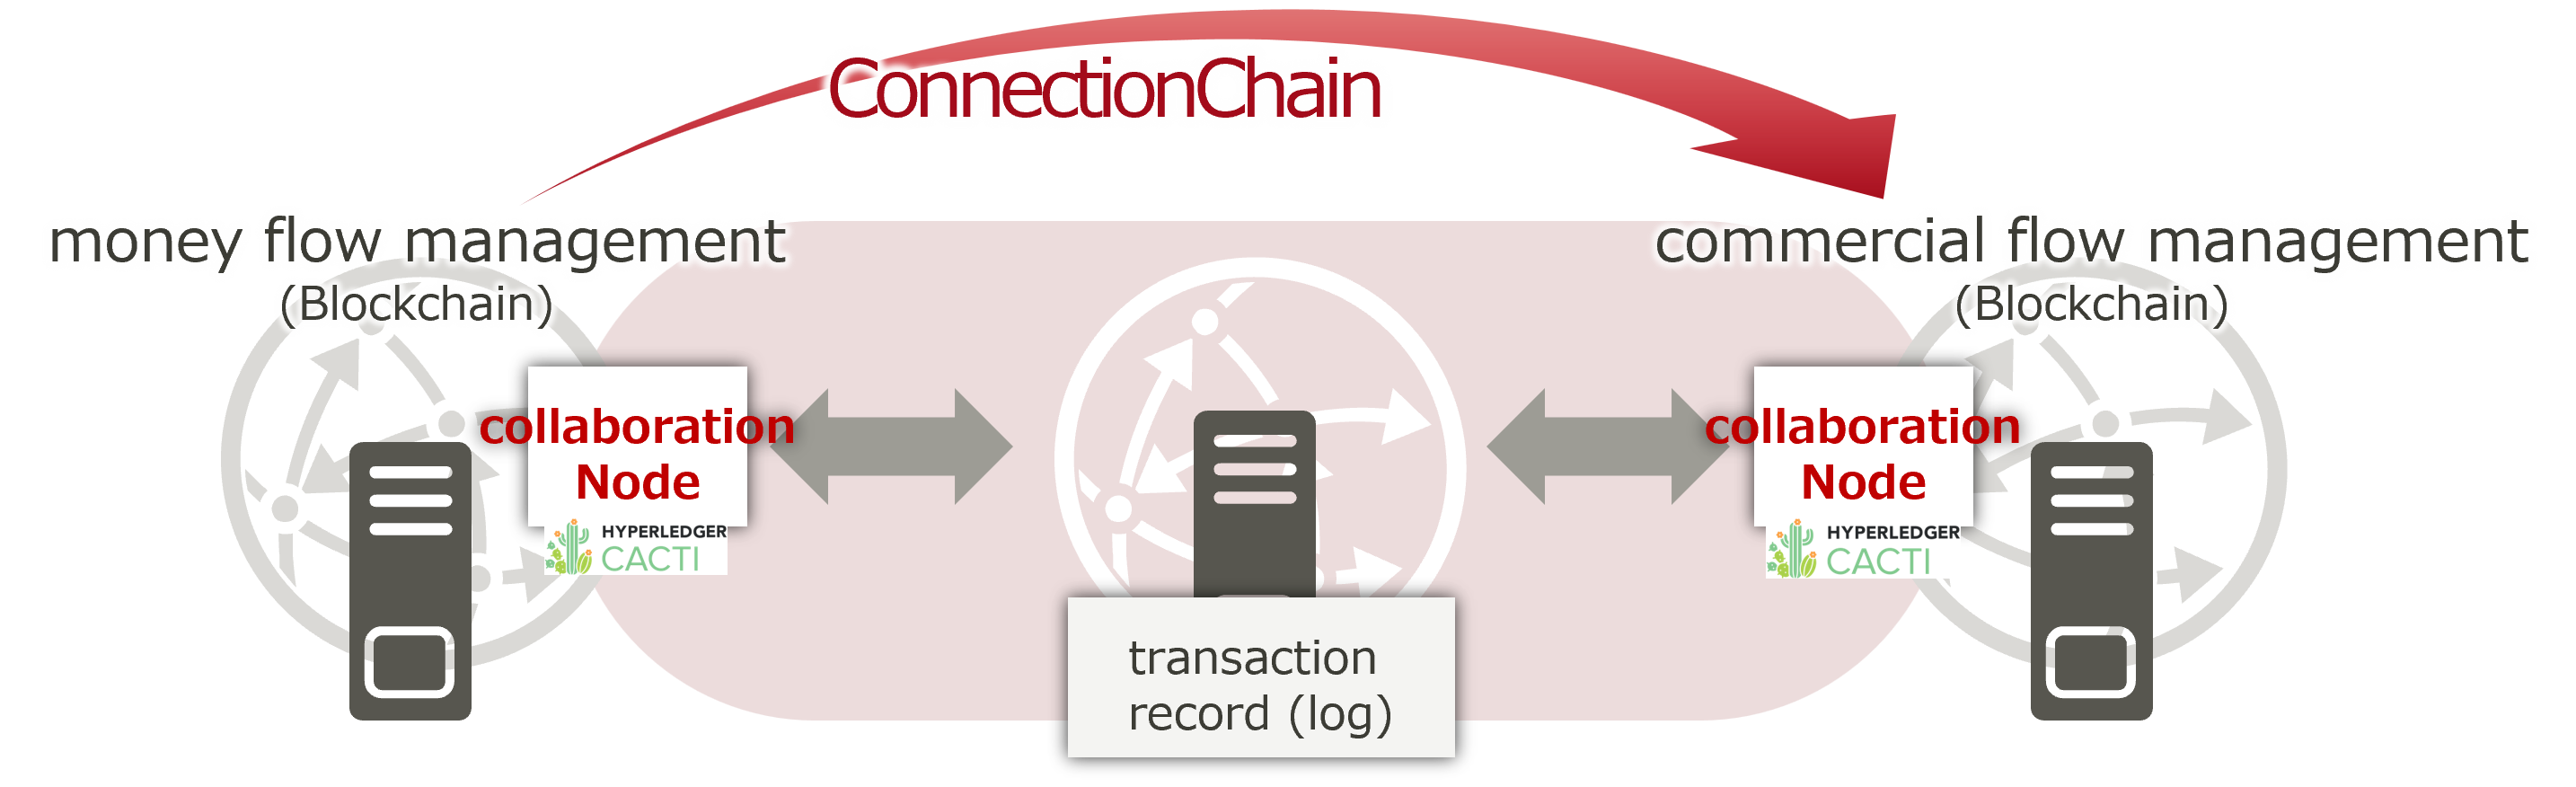 ConnectionChain Overview